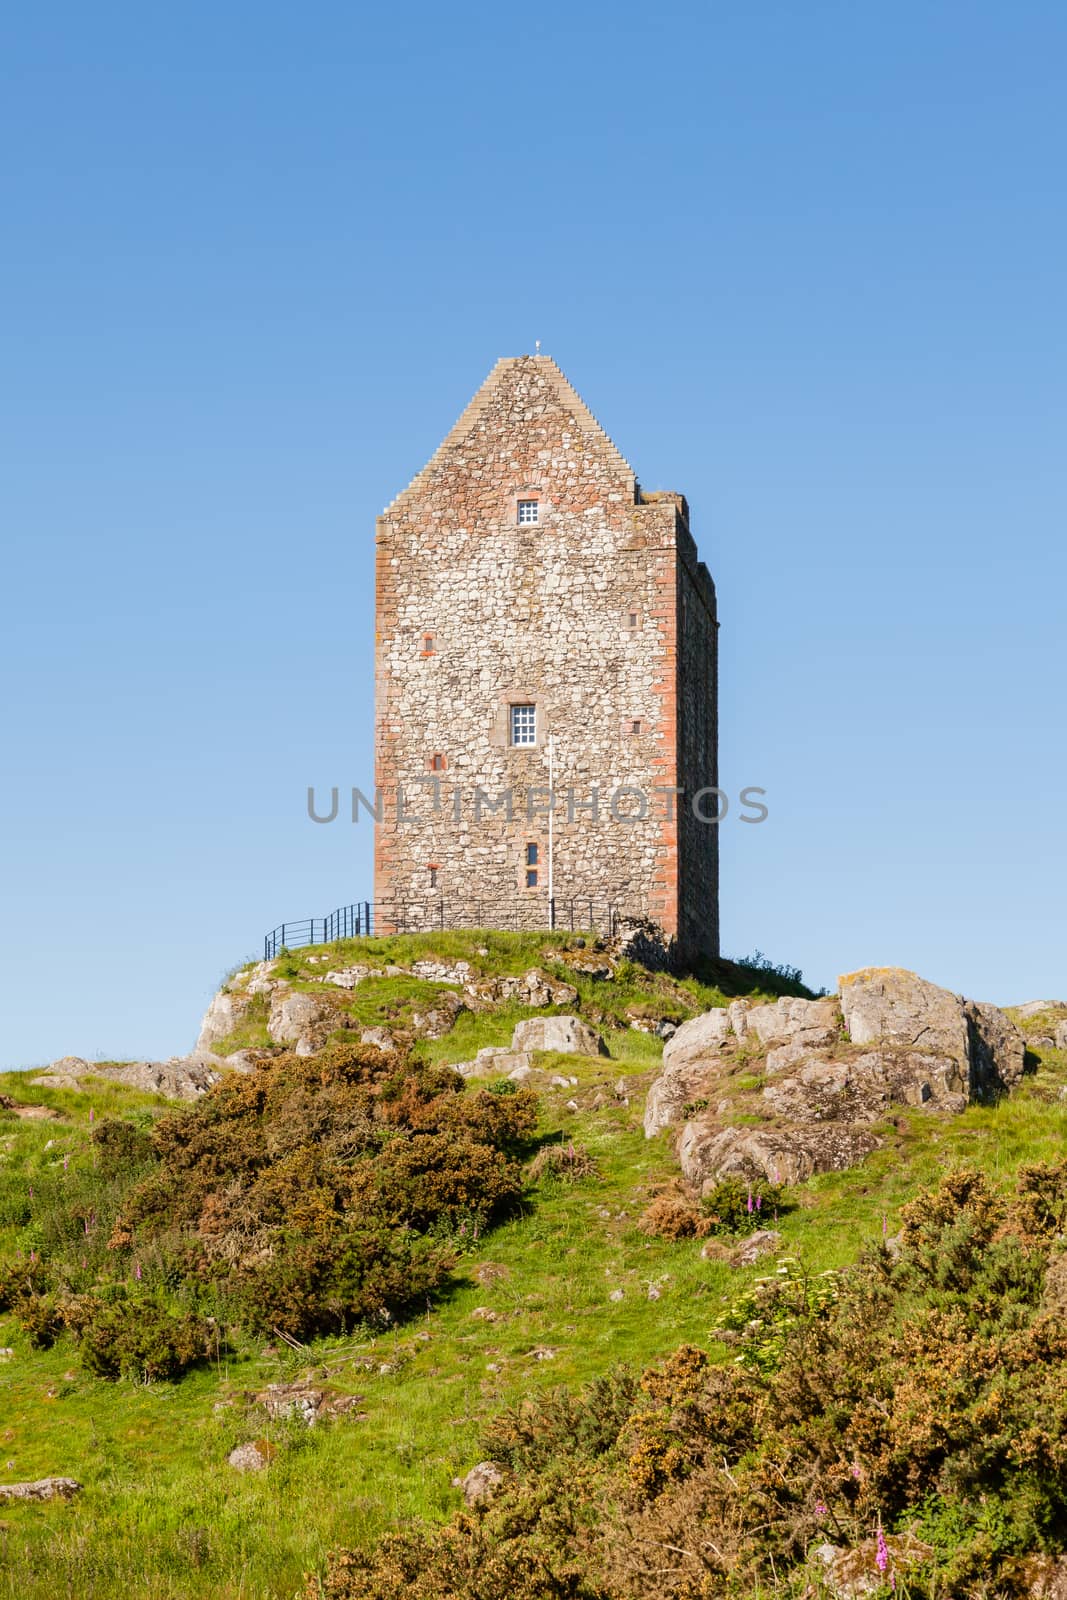 The tower in the Scottish Borders was build in the 1400's as protection from border raiders and the elements.